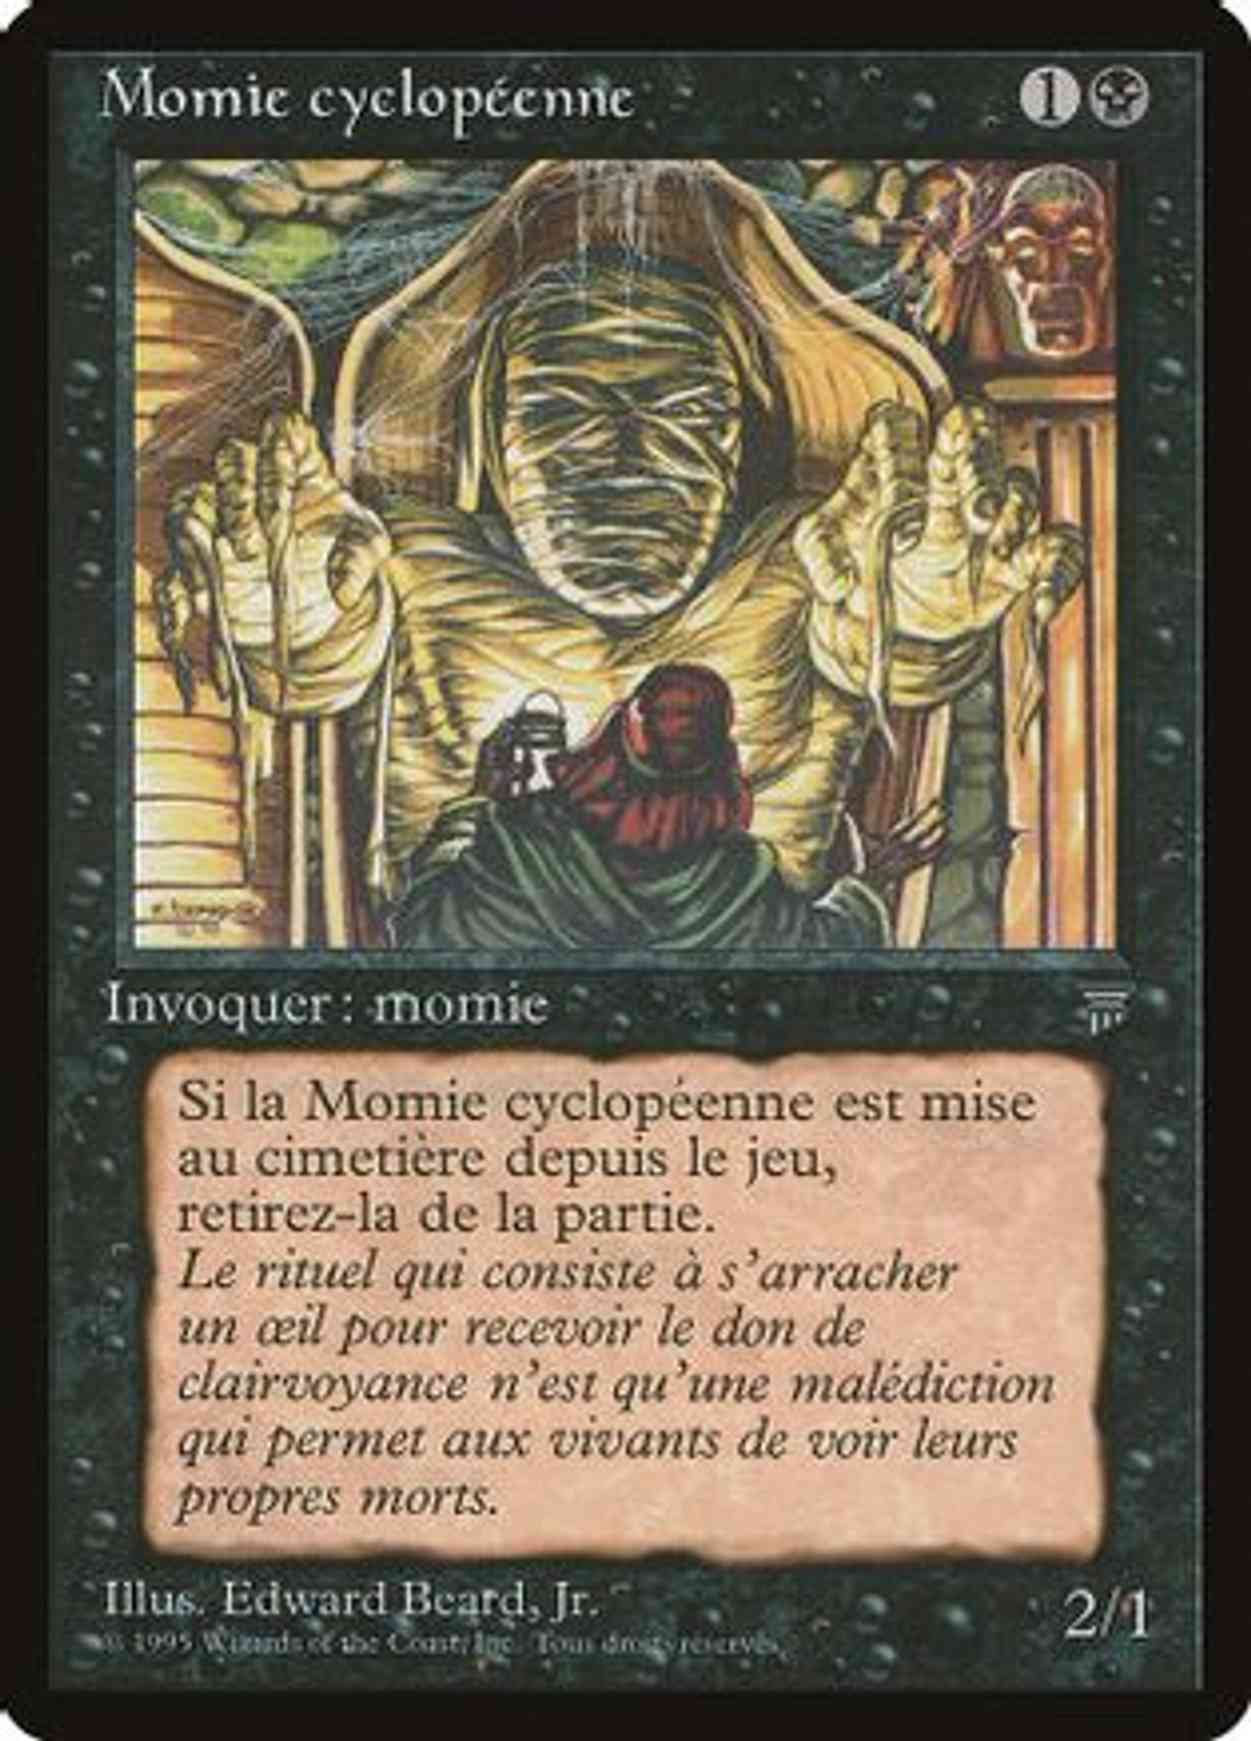 Cyclopean Mummy (French) - "Momie cyclopeenne" magic card front